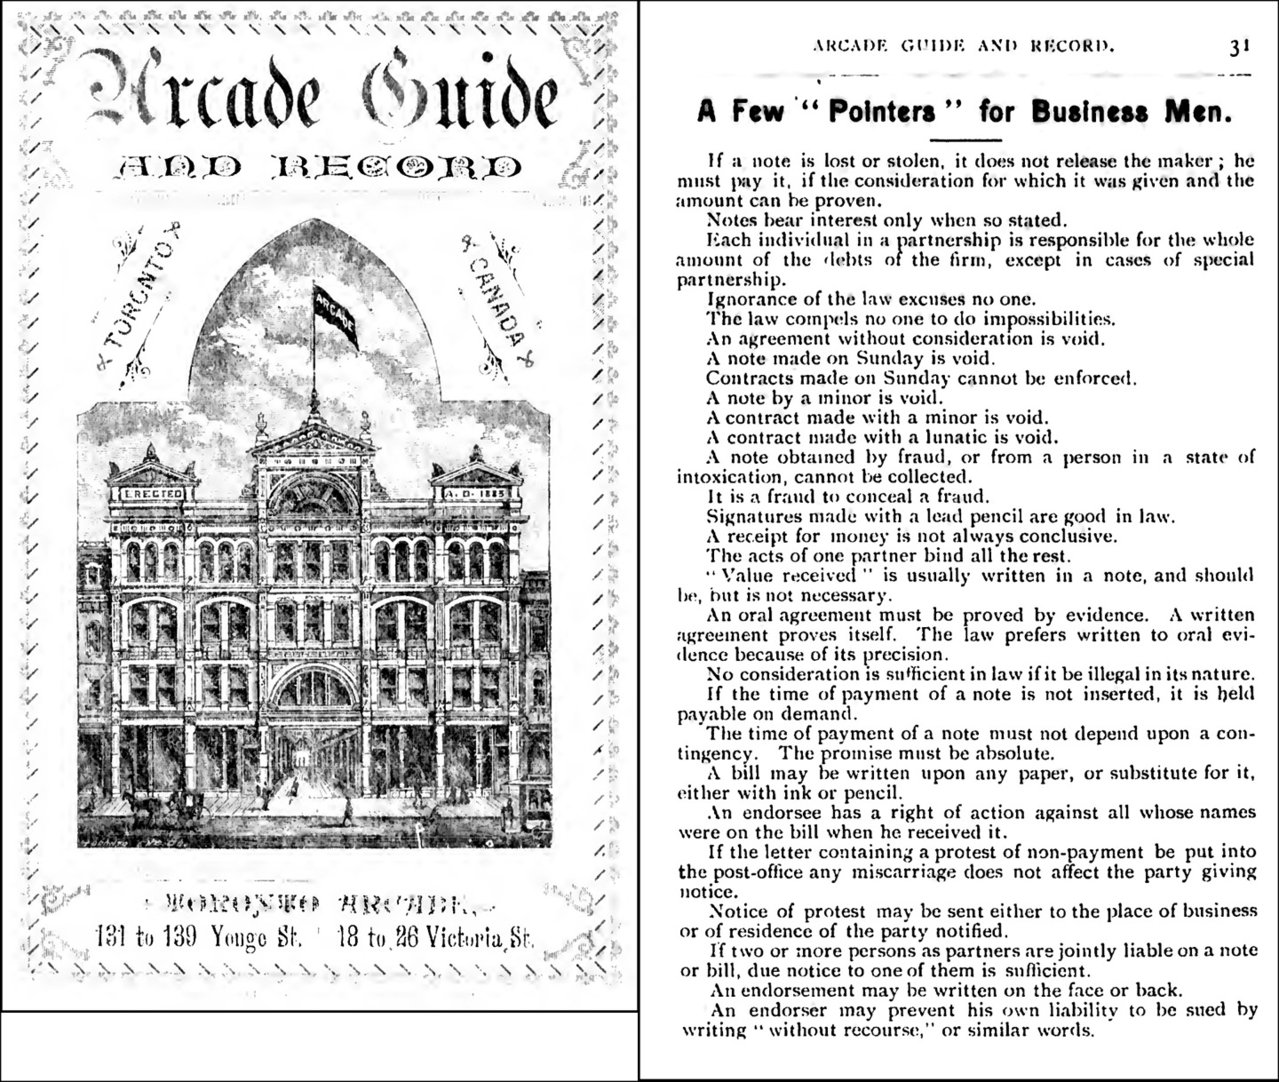 'Pointers' from Arcade Guide and Record 1884.jpg